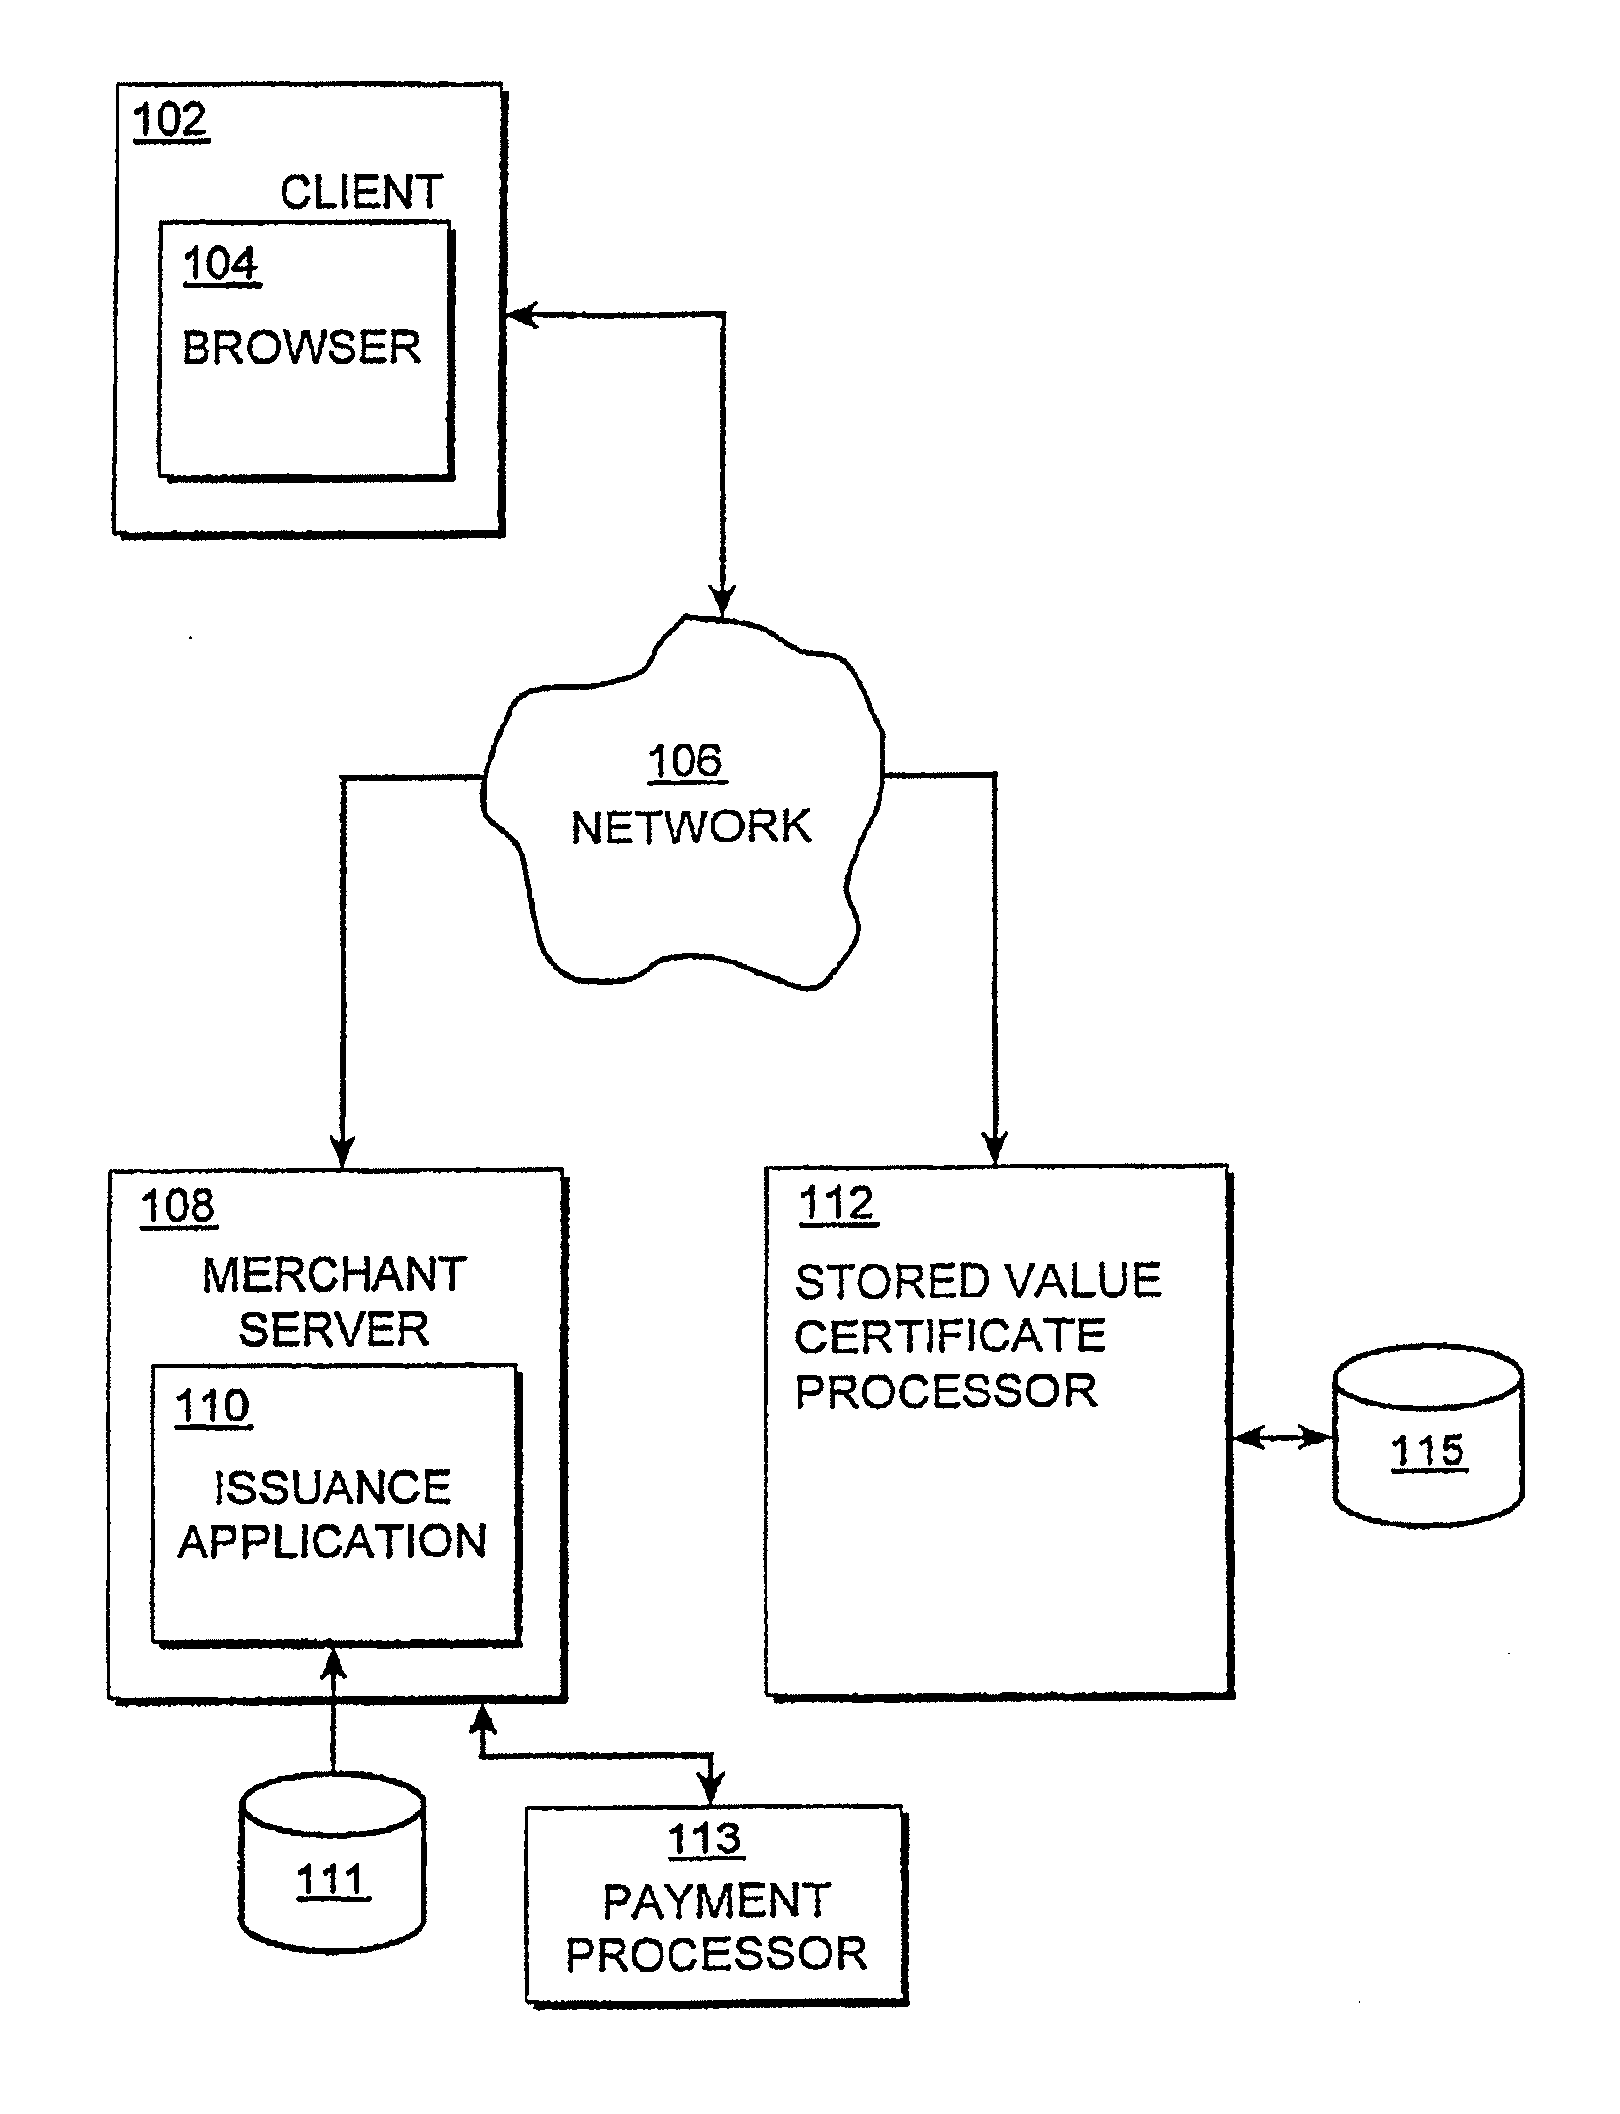 Stored value electronic certificate processing